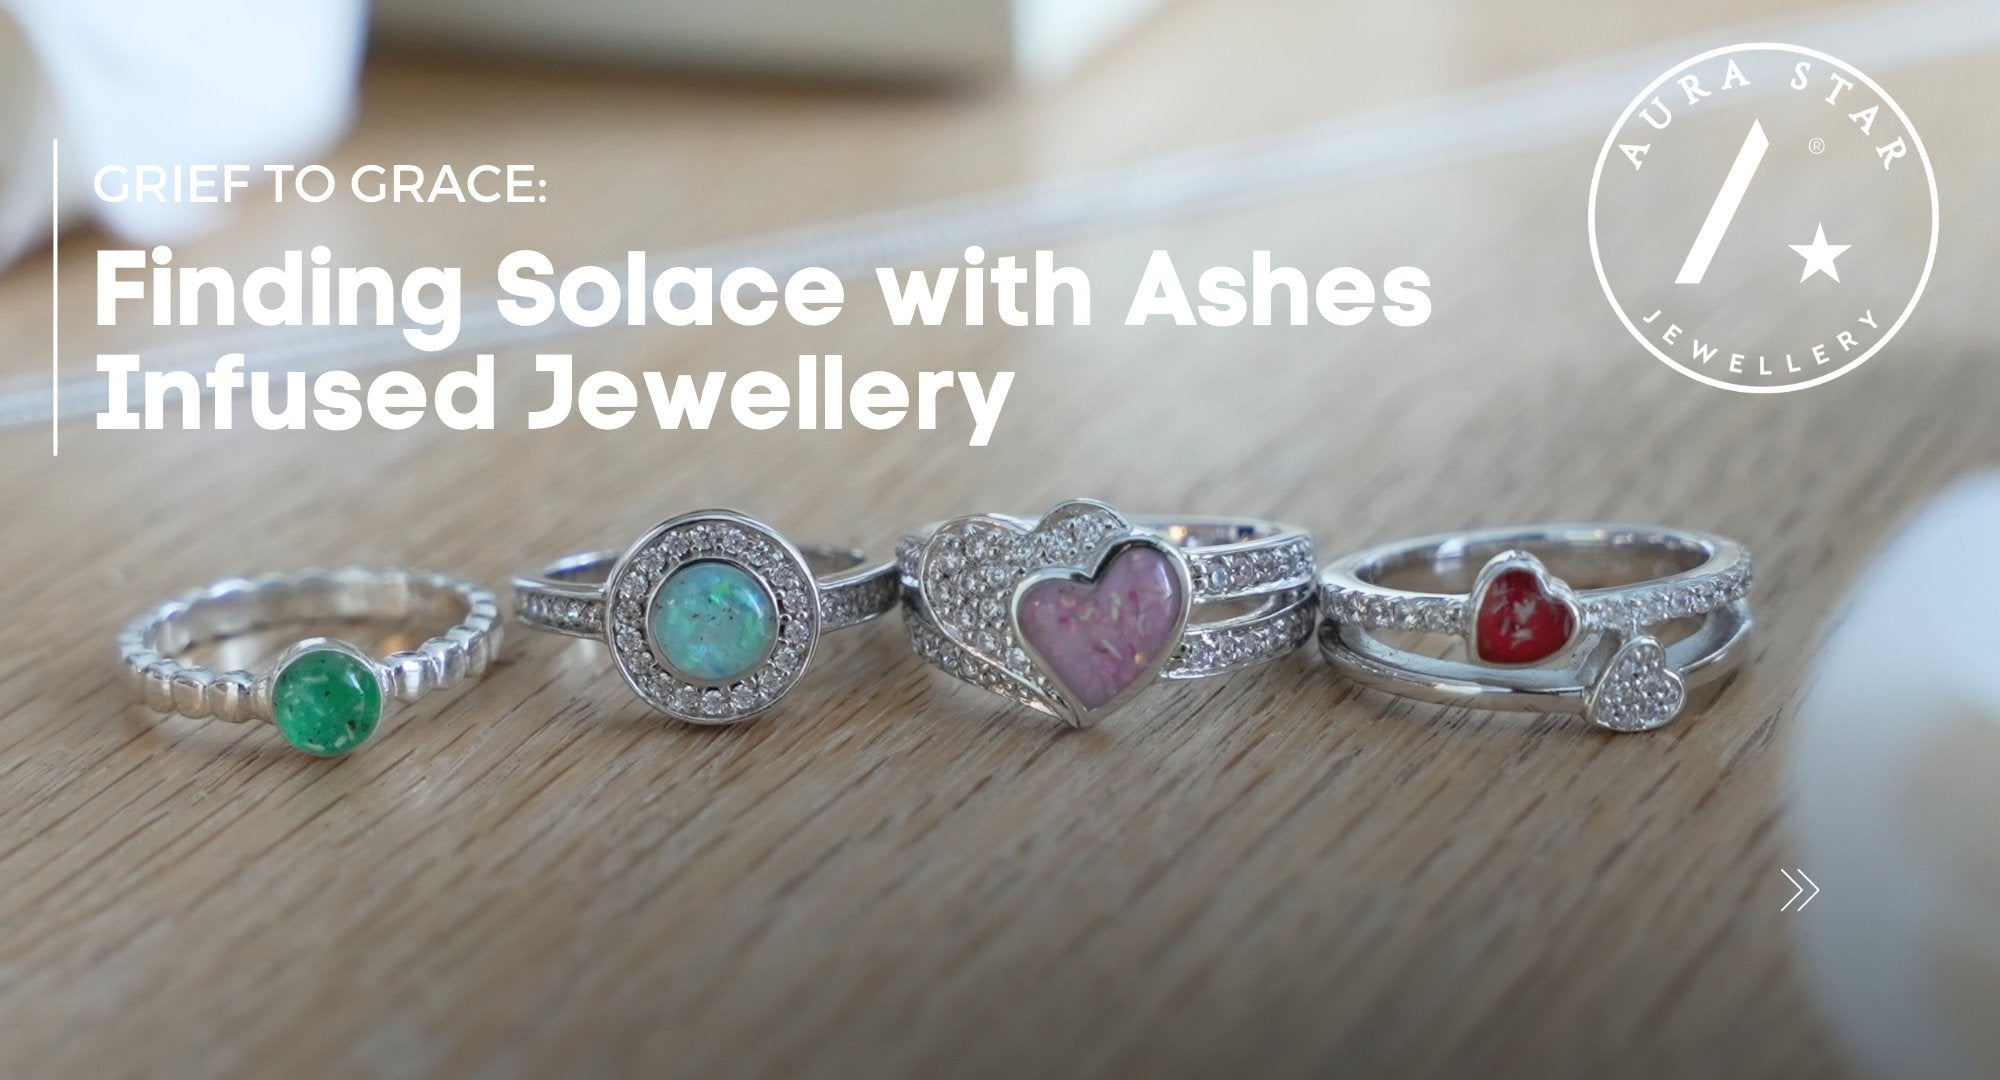 Grief to Grace: Finding Solace with Ashes Infused Jewellery - Aura-Star® Jewellery